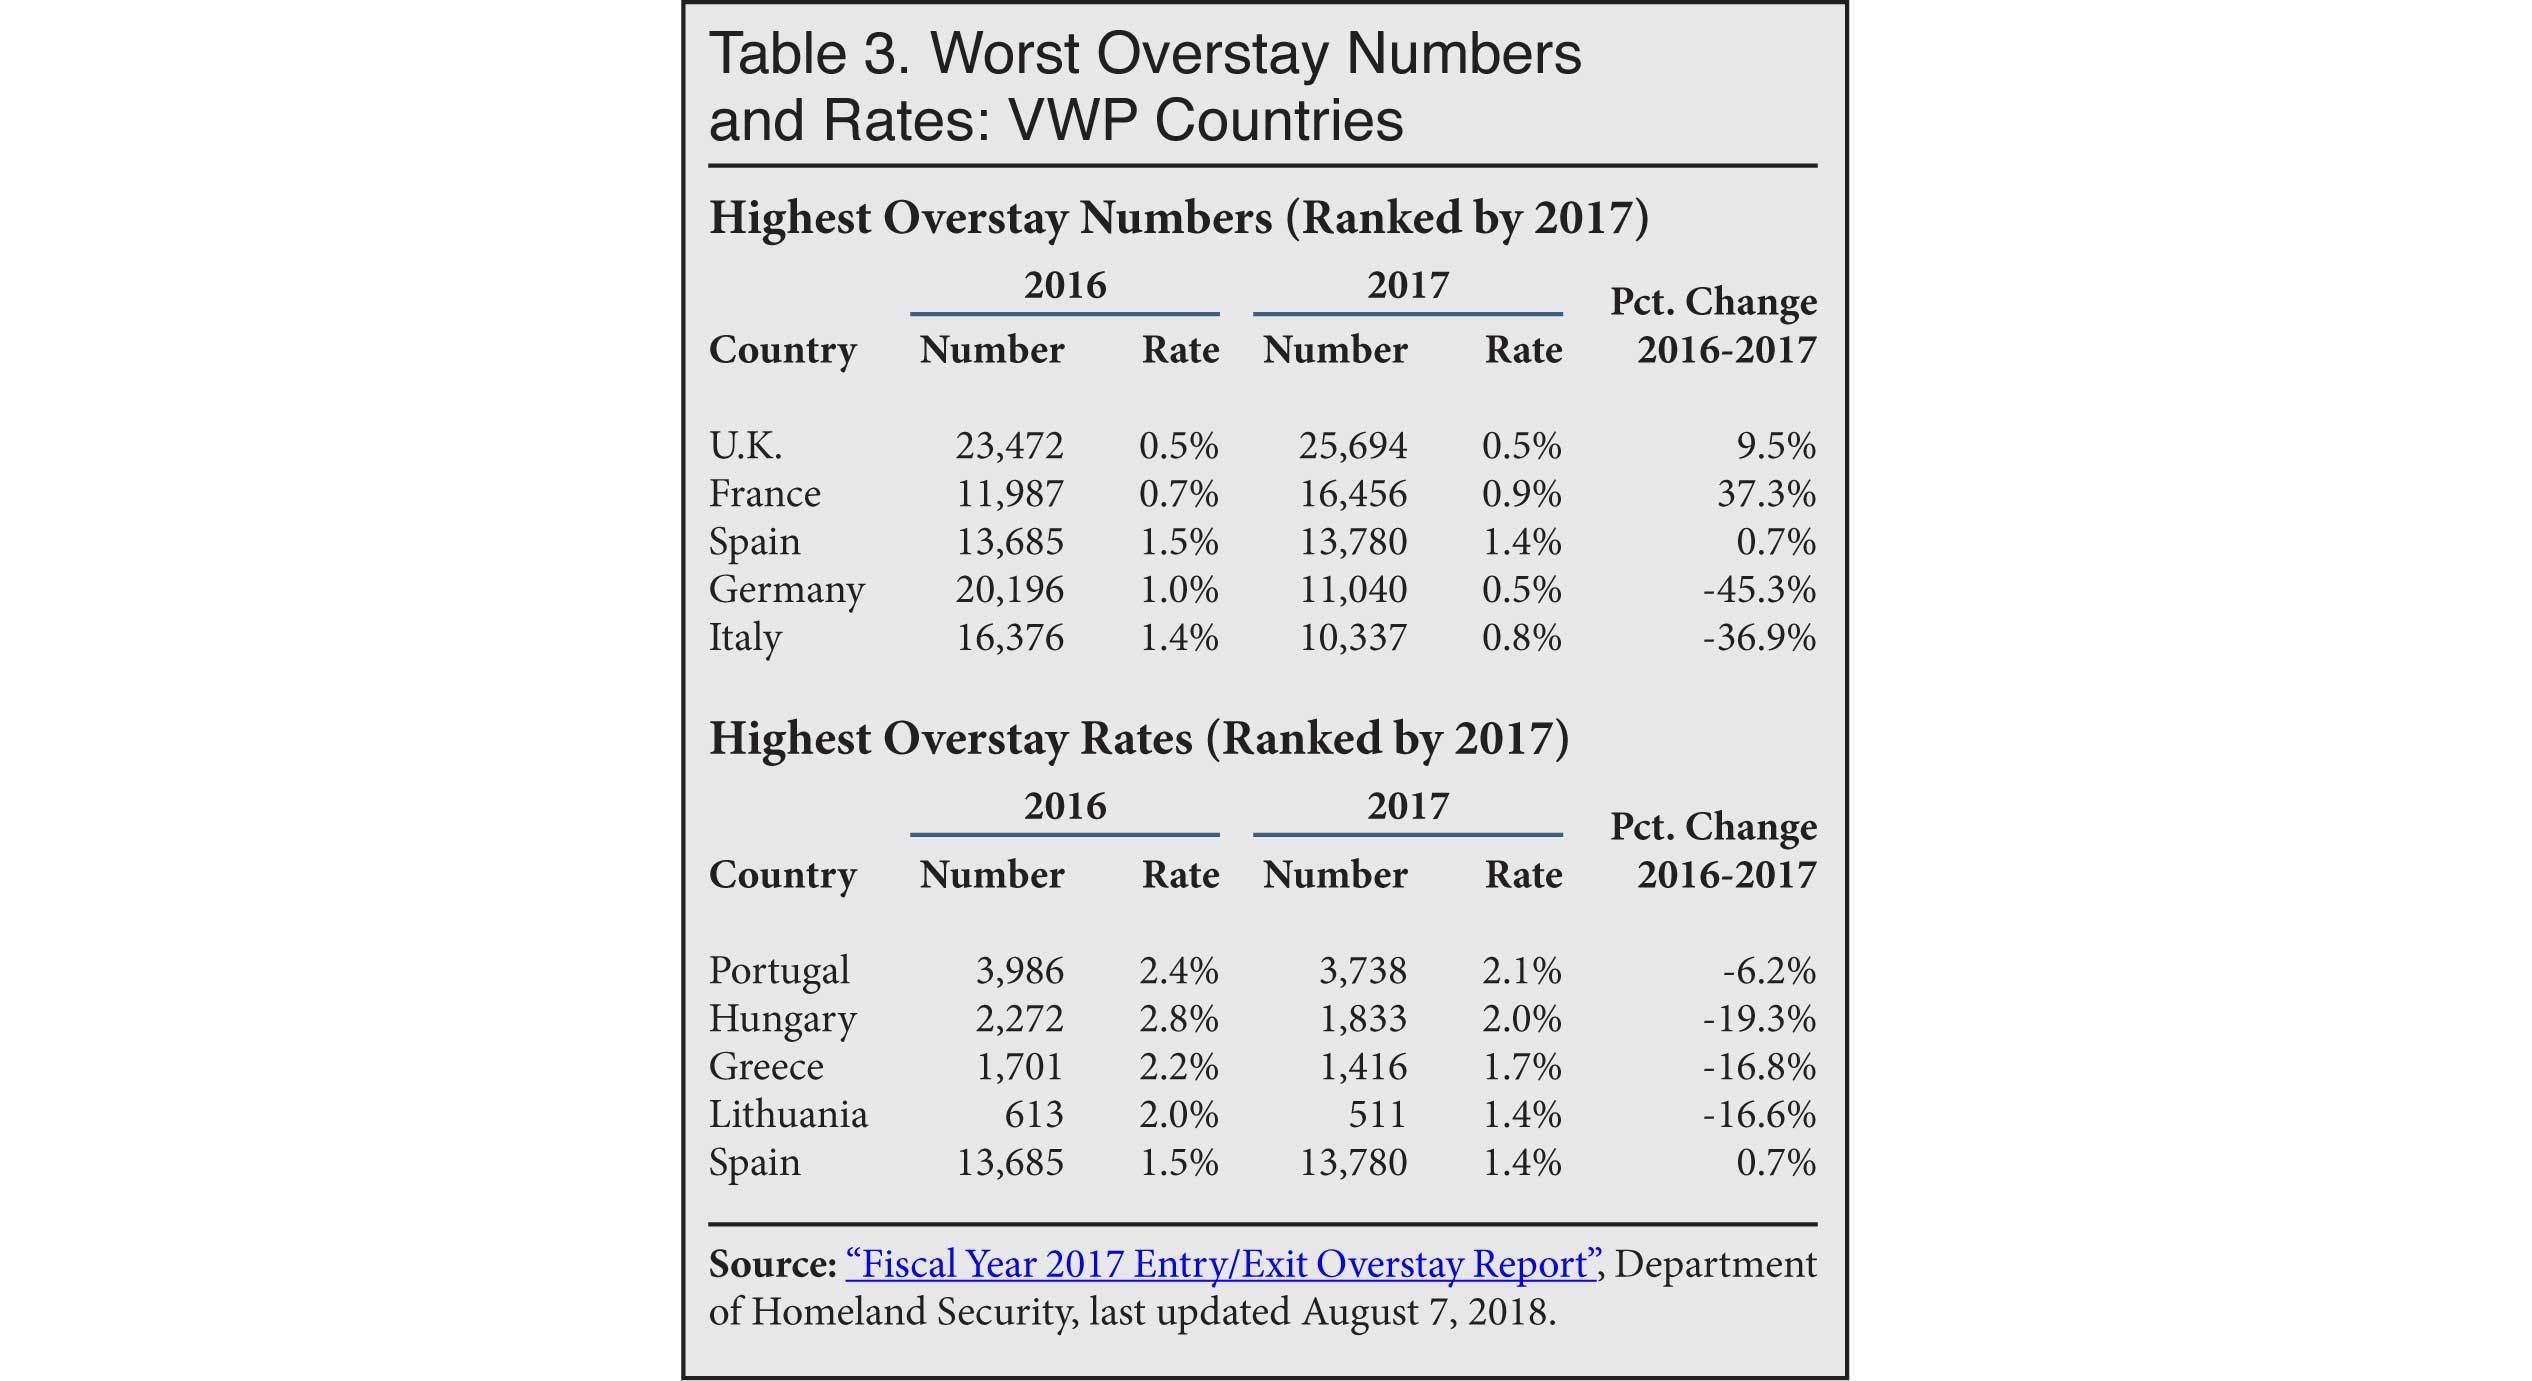 Table: Worst Overstay Numbers and Rates of VWP Countries, 2017